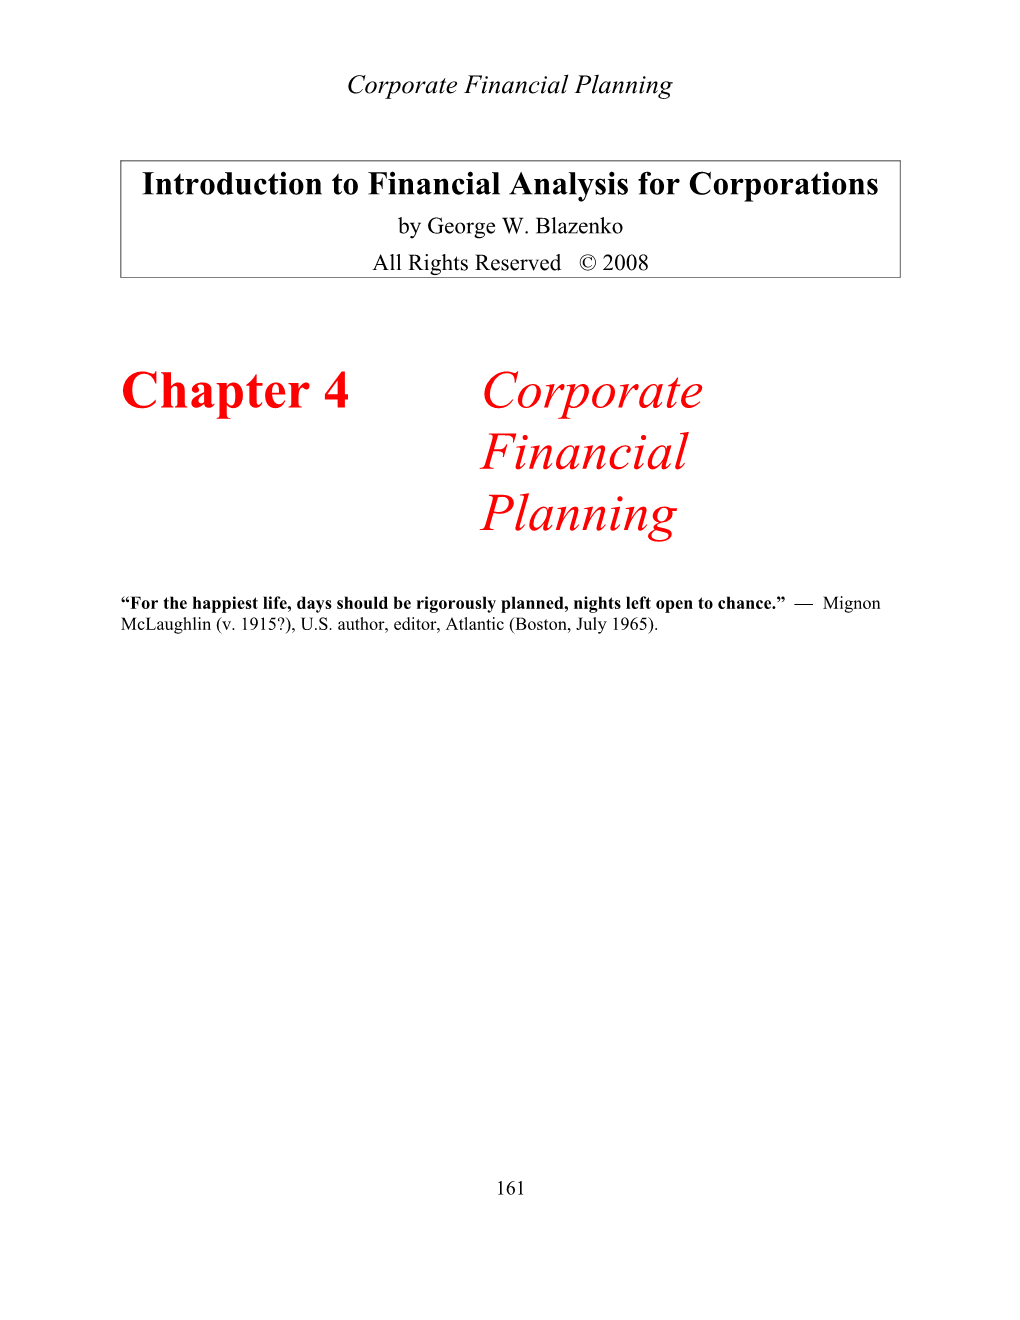 Introduction to Financial Analysis for Corporations